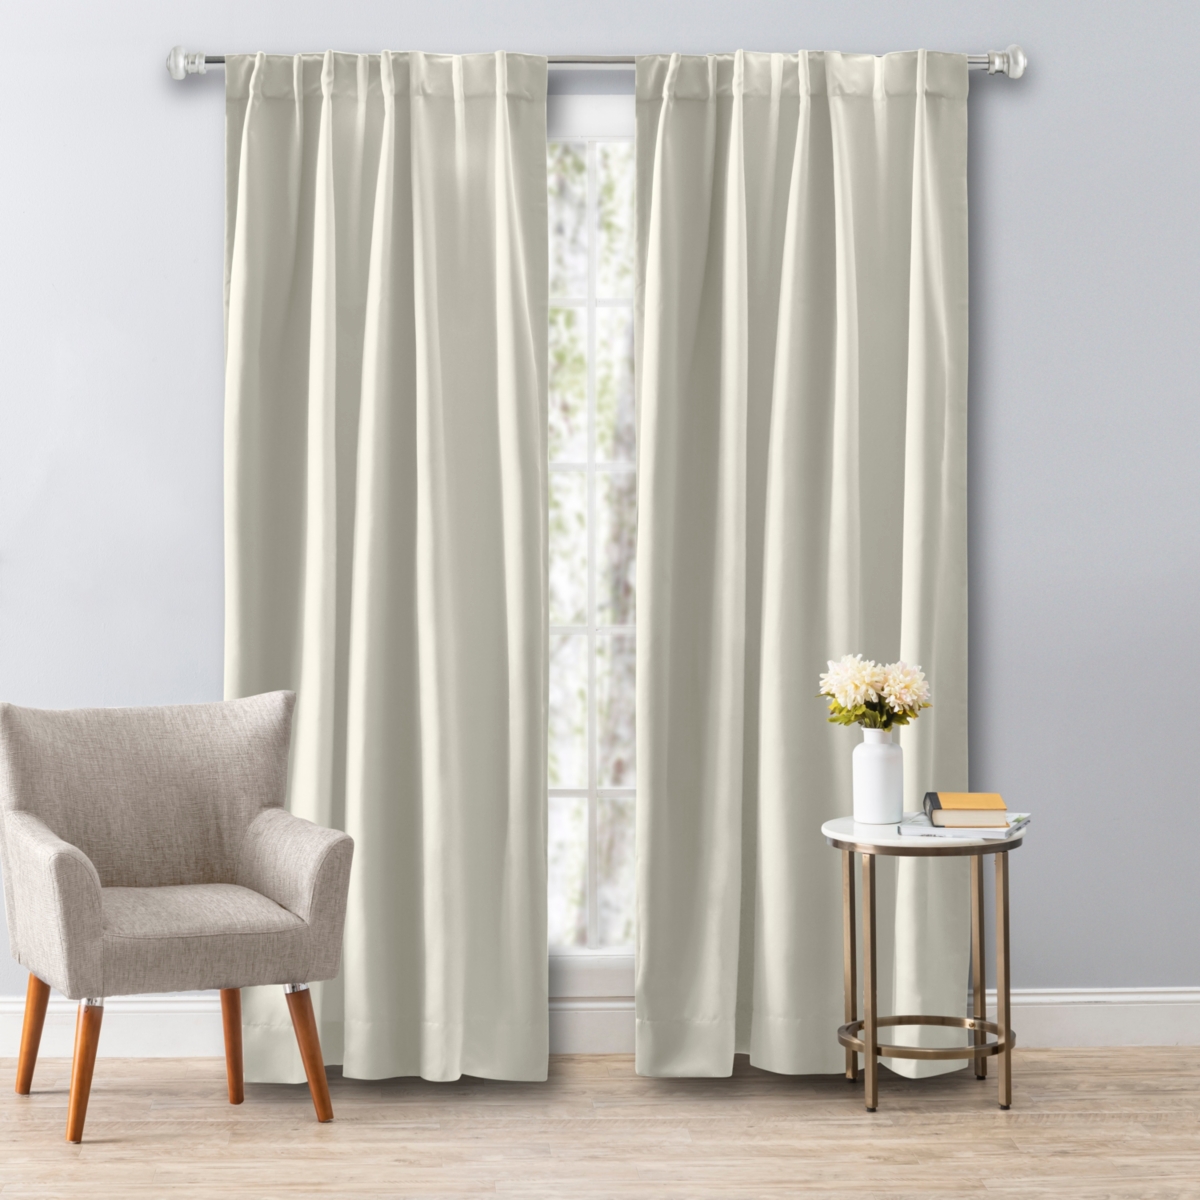 Ultimate Black-Out 2-Way Pocket Curtain Panel 56"W x 72"L - Ivory